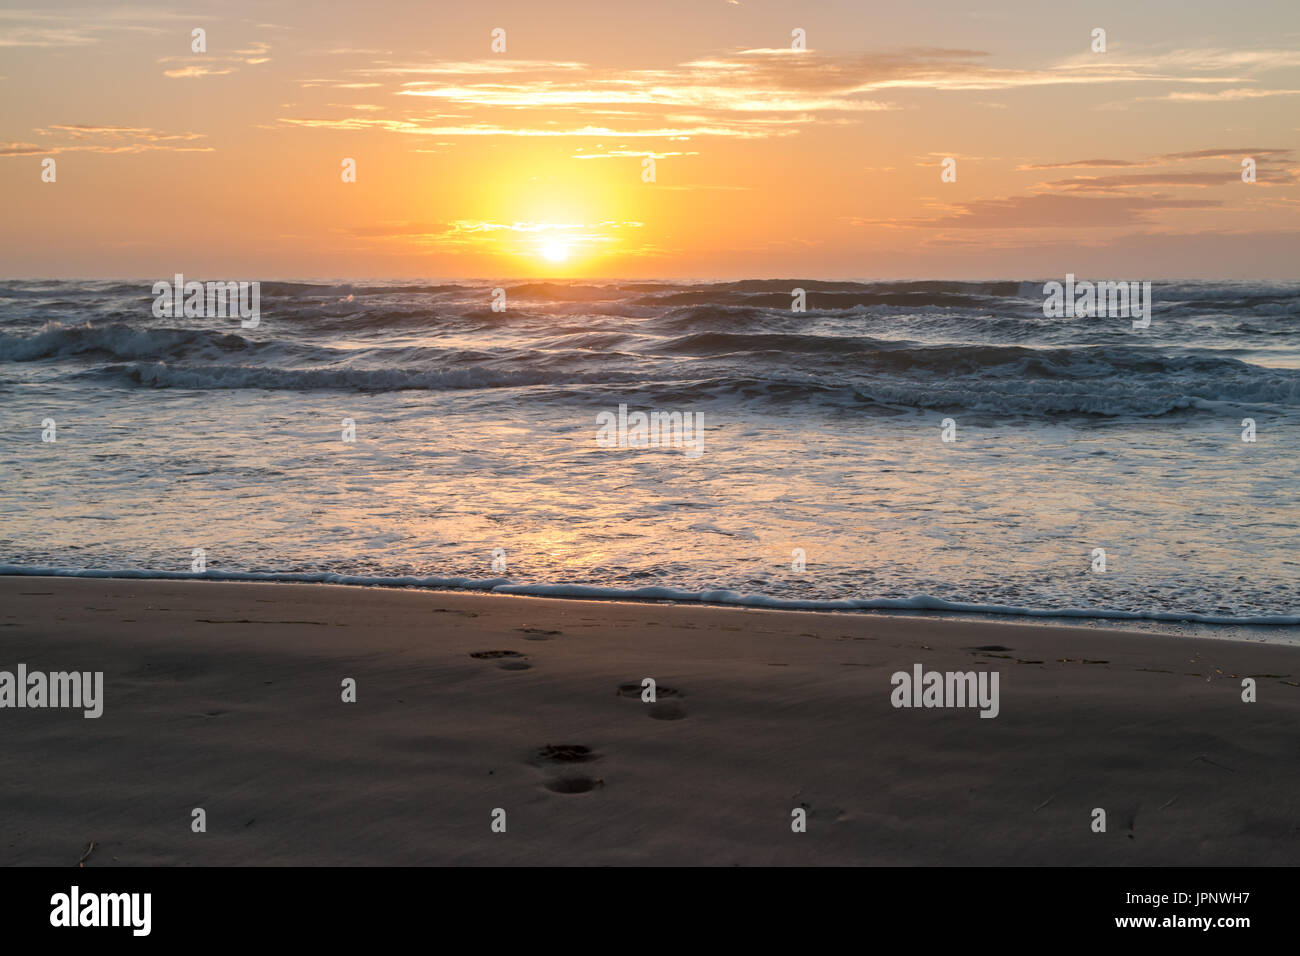 Sun Rising Over Calm Ocean with Foot Prints in the Foreground Stock Photo